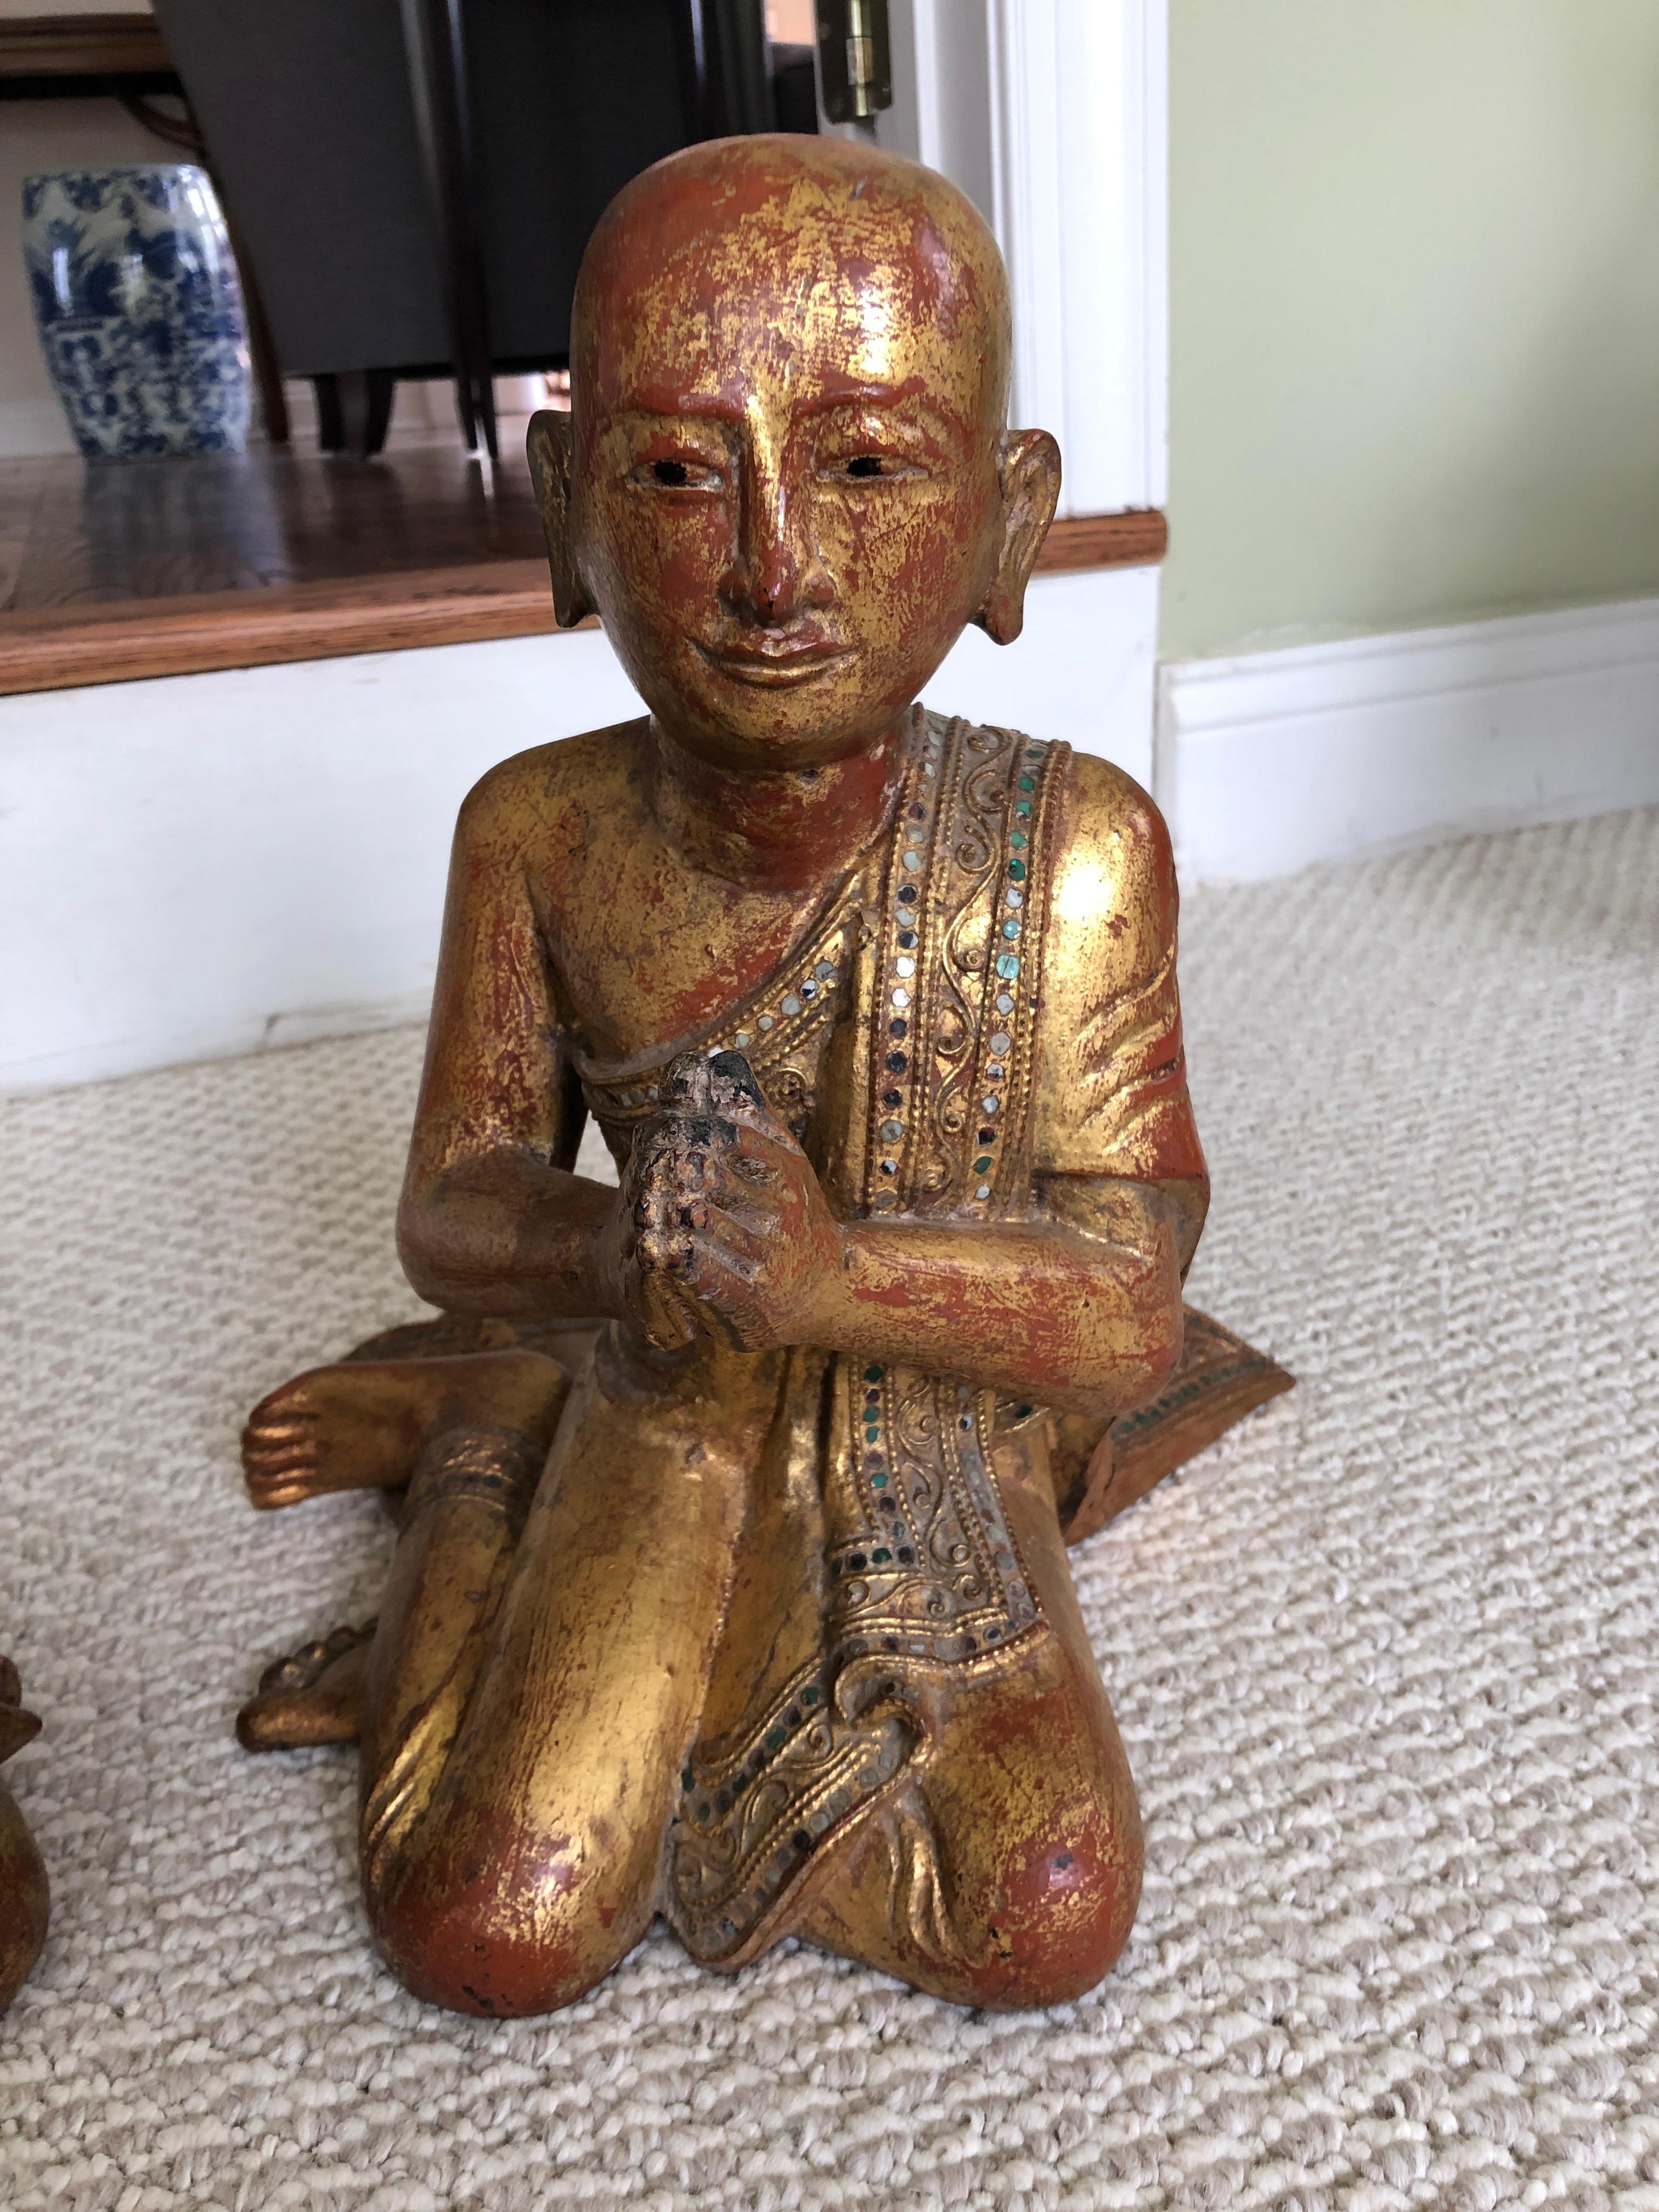 A pair of gorgeous seated monk sculptures, one listening and one praying, having gilded carved wood with wonderful red under paint and lovely colored glass inlaid embellishments. Mandalay period originally from Burma. Each monk is unique with